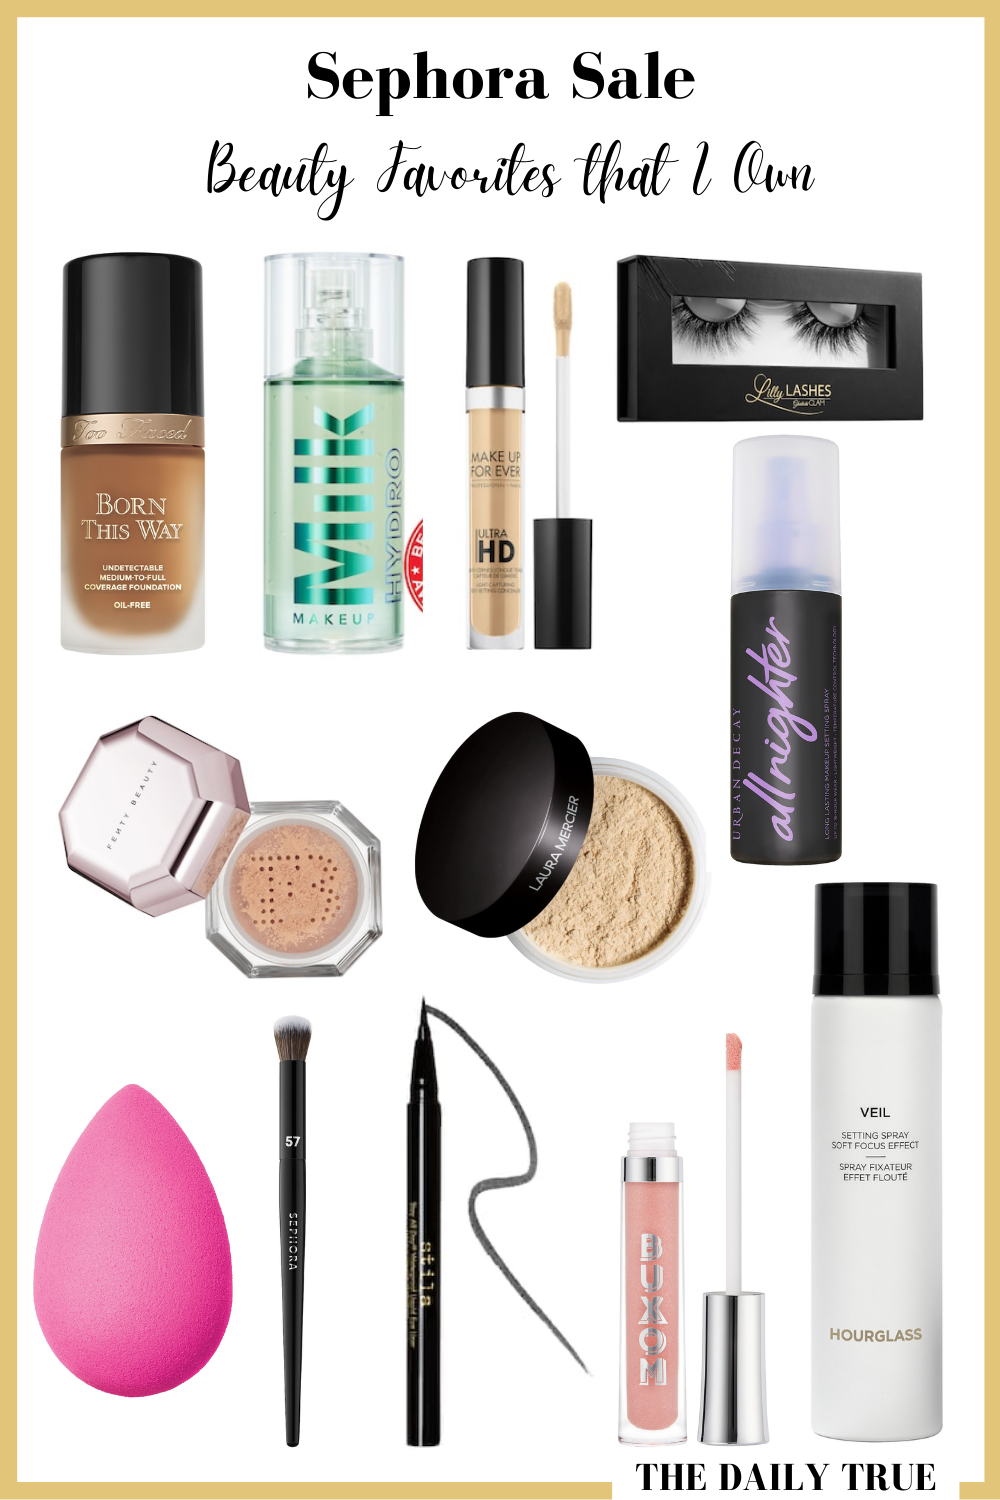 Beauty Favorites from Sephora